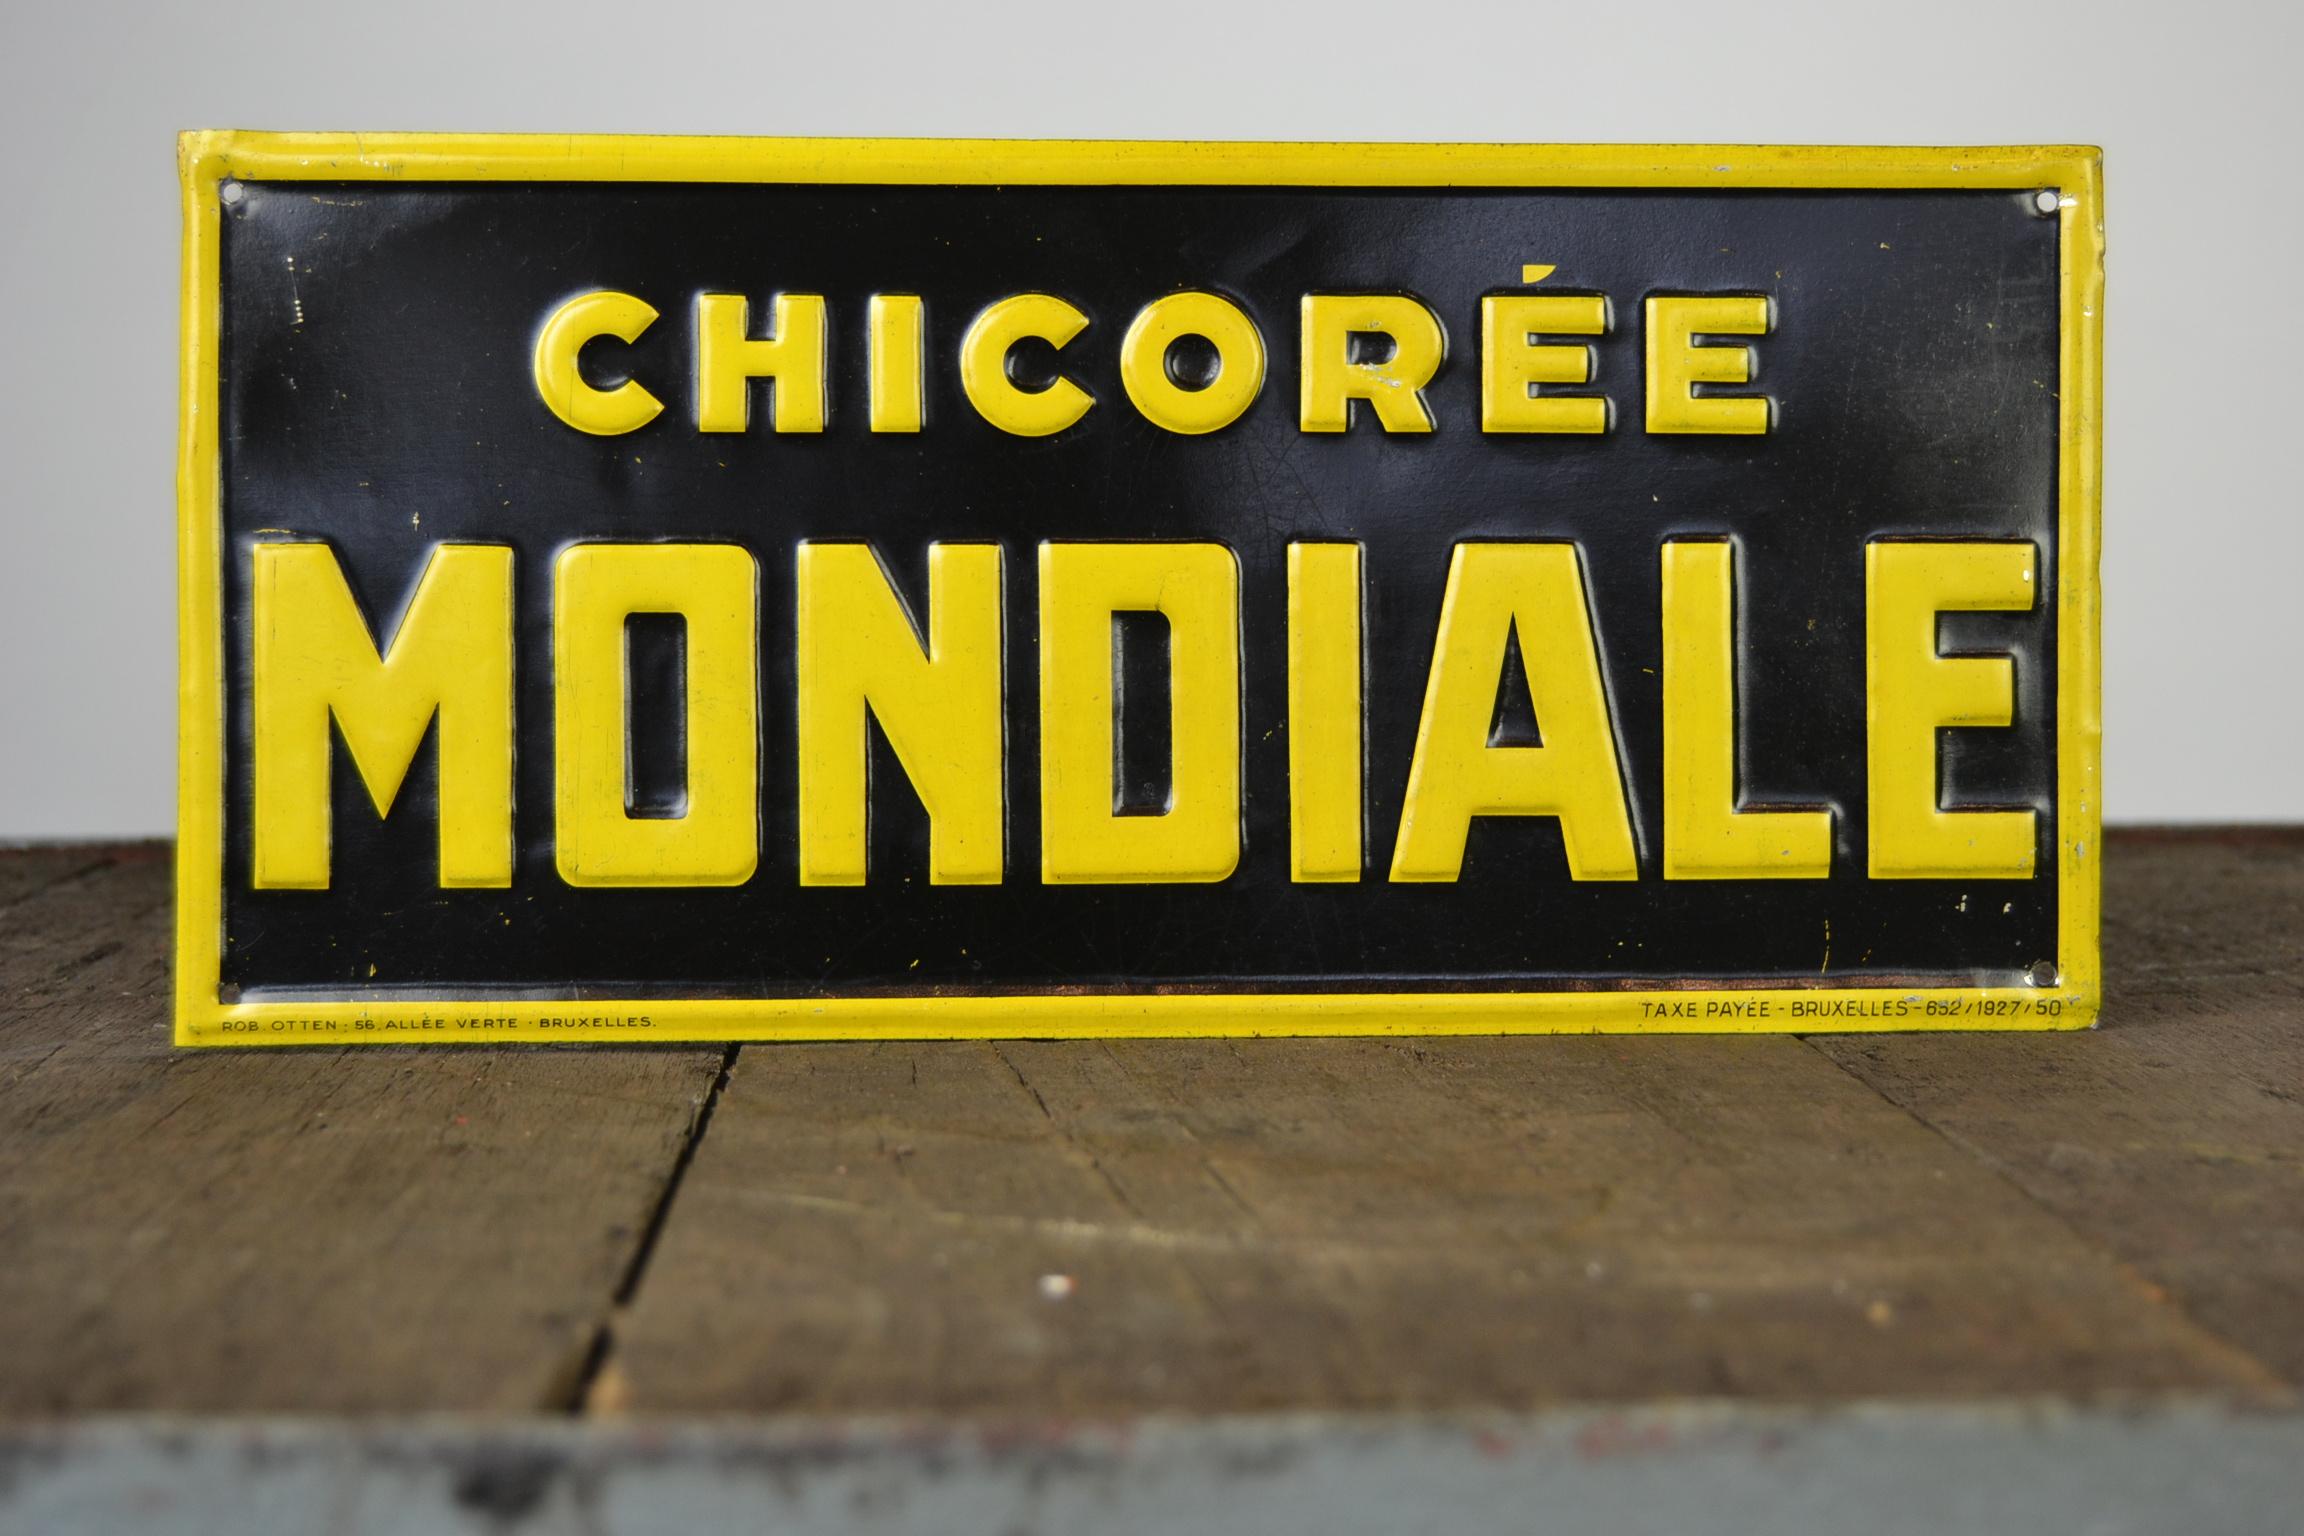 1920s Tin Advertising Sign for Chicorée Mondiale by Rob Otten, Belgium For Sale 6